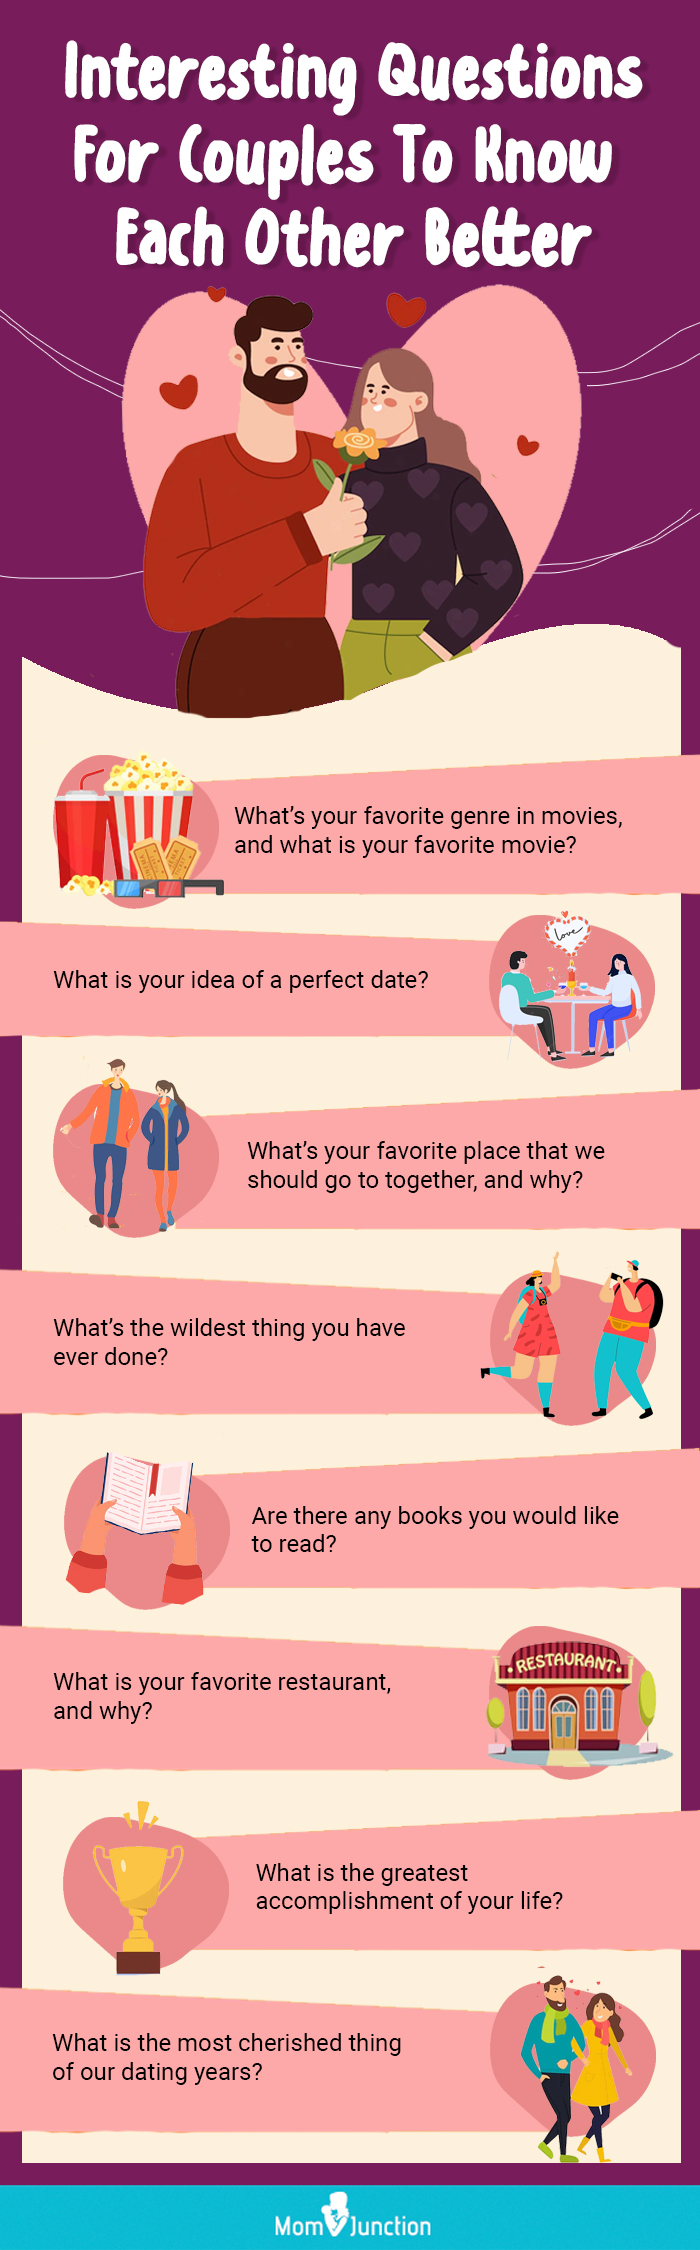 200+ Intimate, Funny And Curious Questions To Ask Your Partner